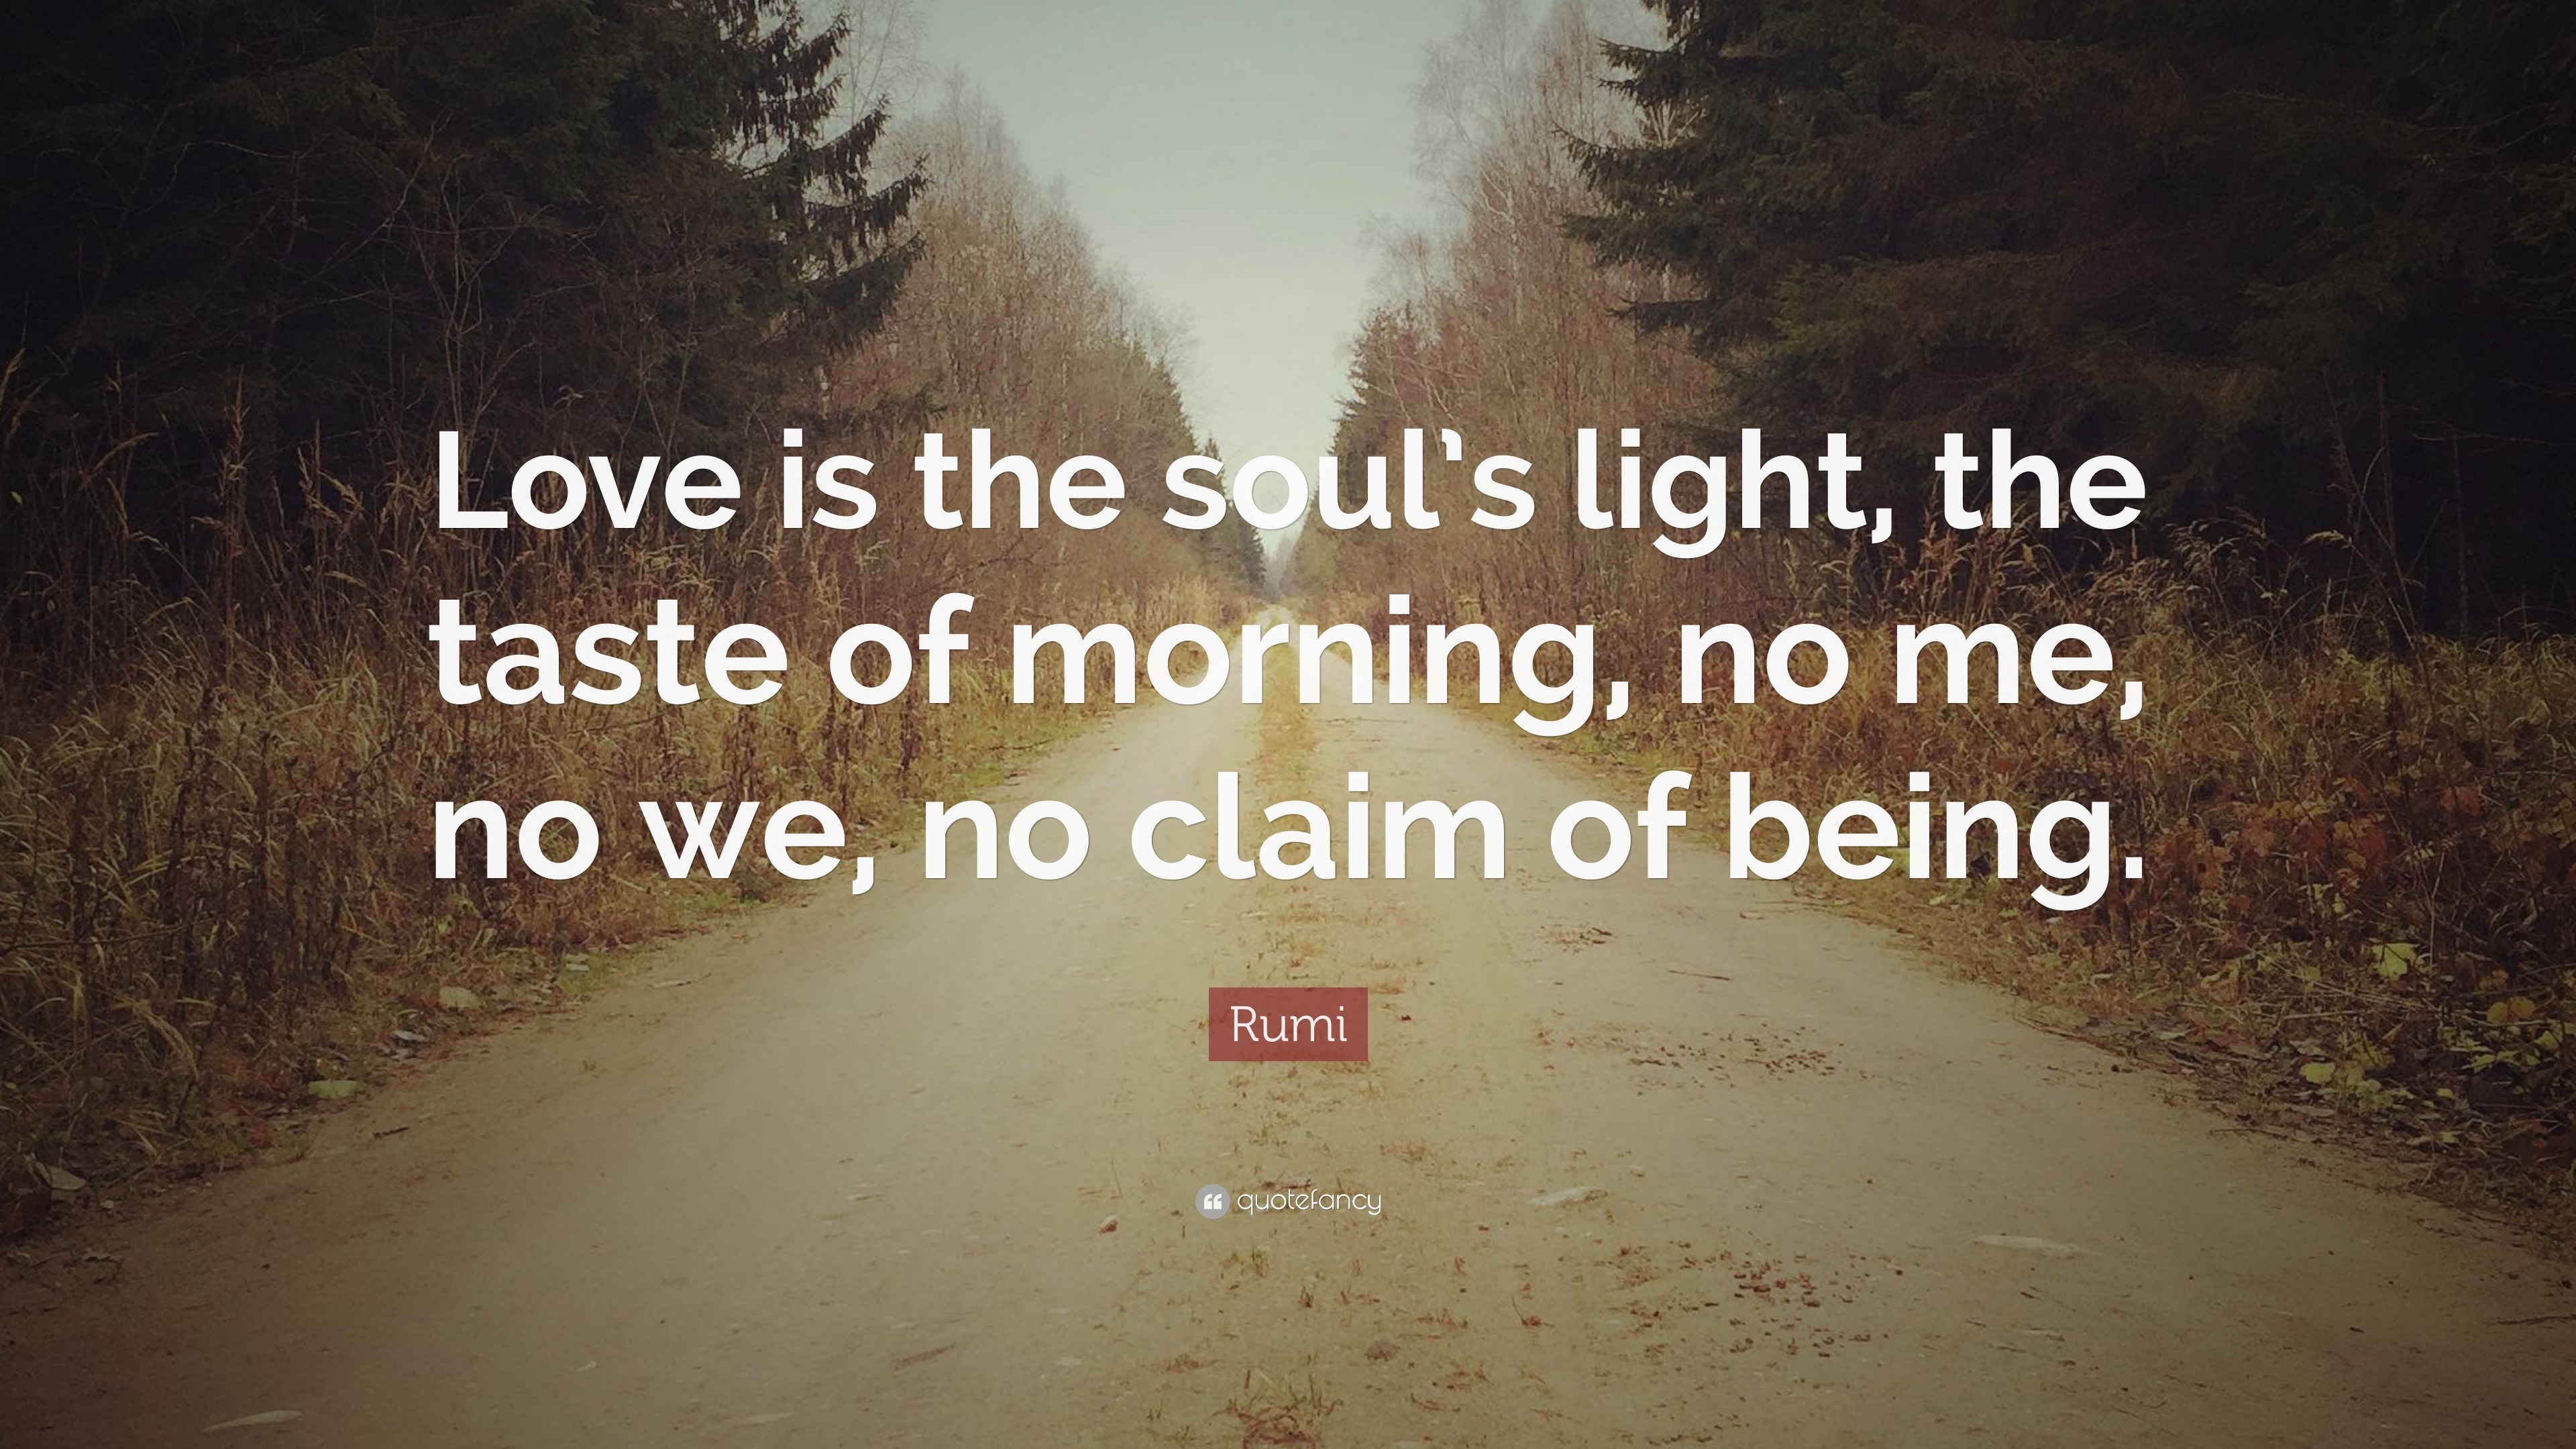 Rumi Quote “Love is the soul’s light, the taste of